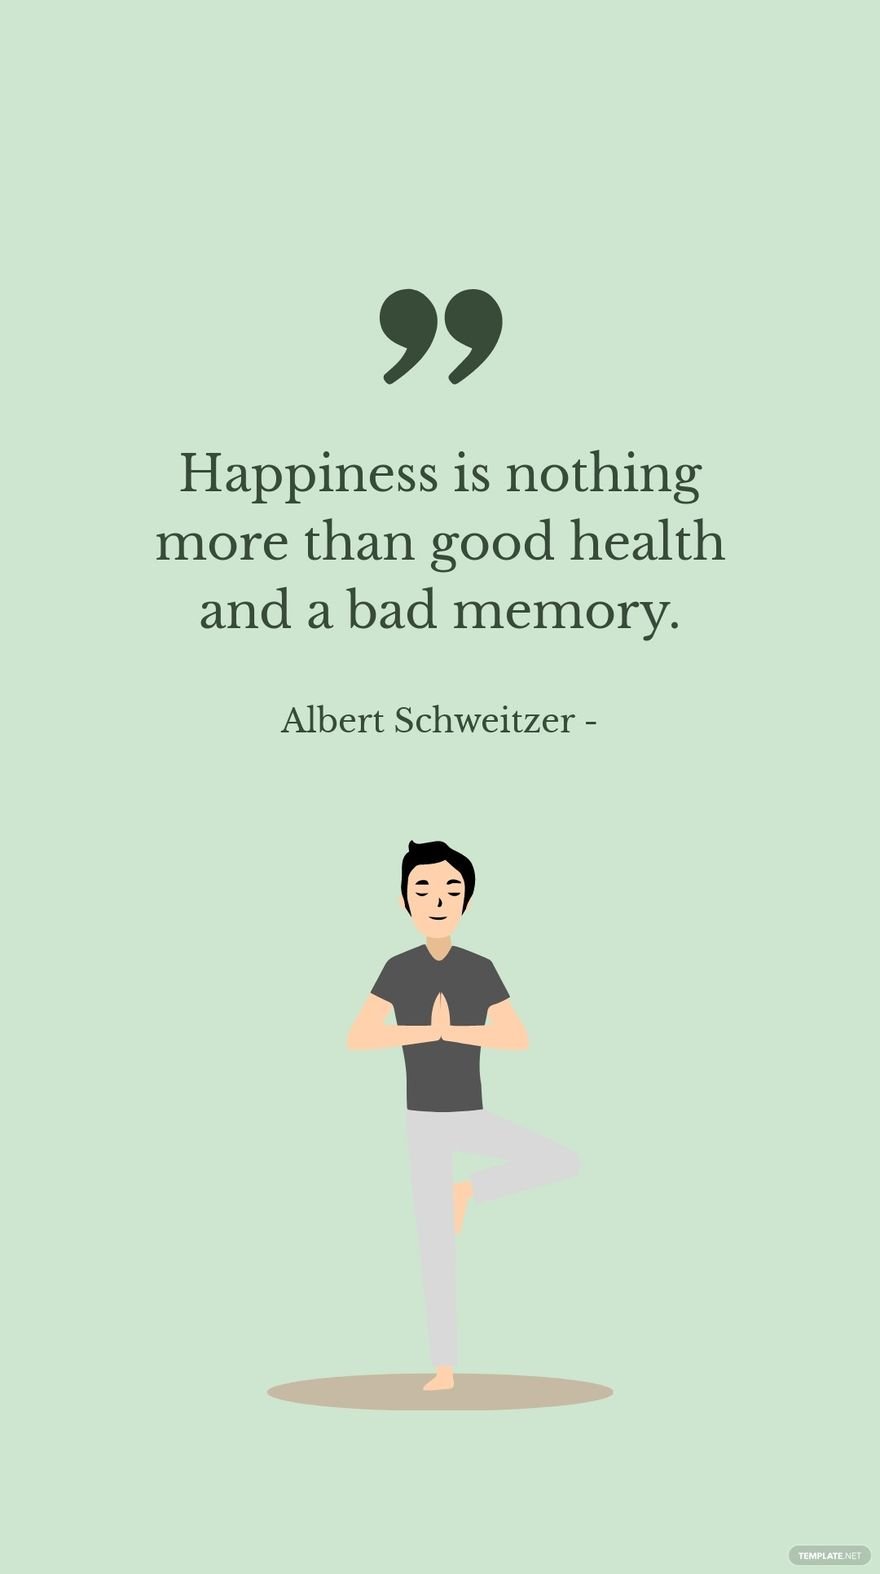 Free Albert Schweitzer - Happiness is nothing more than good health and a bad memory. in JPG